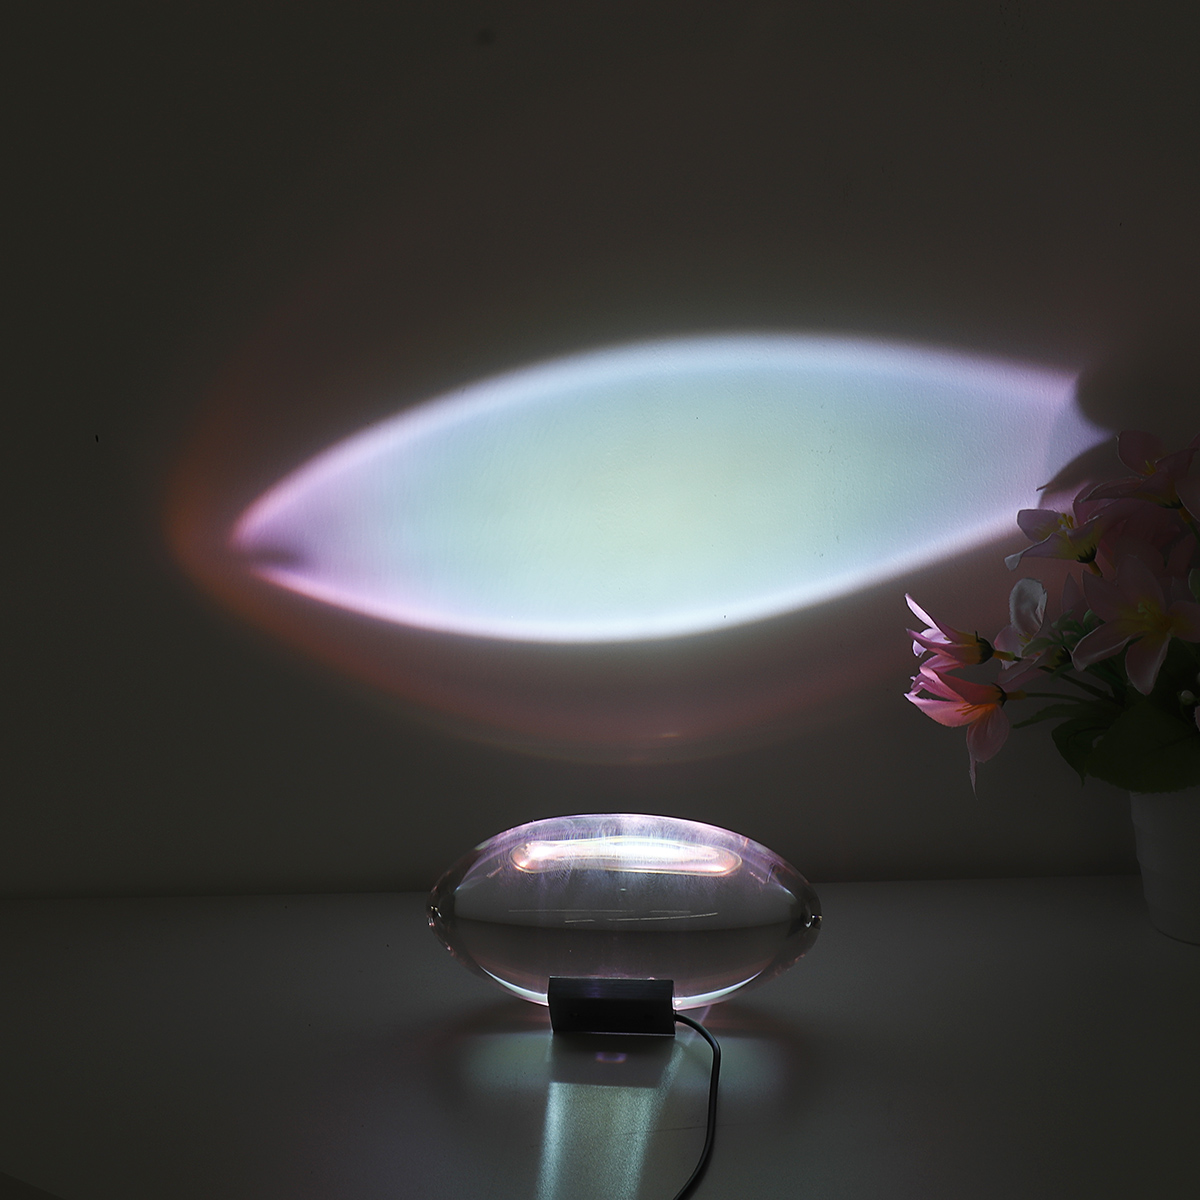 Crystal-Sunset-Projection-Lamp-Decoration-Floor-Bedroom-Night-Light-Atmospheres-1853564-8